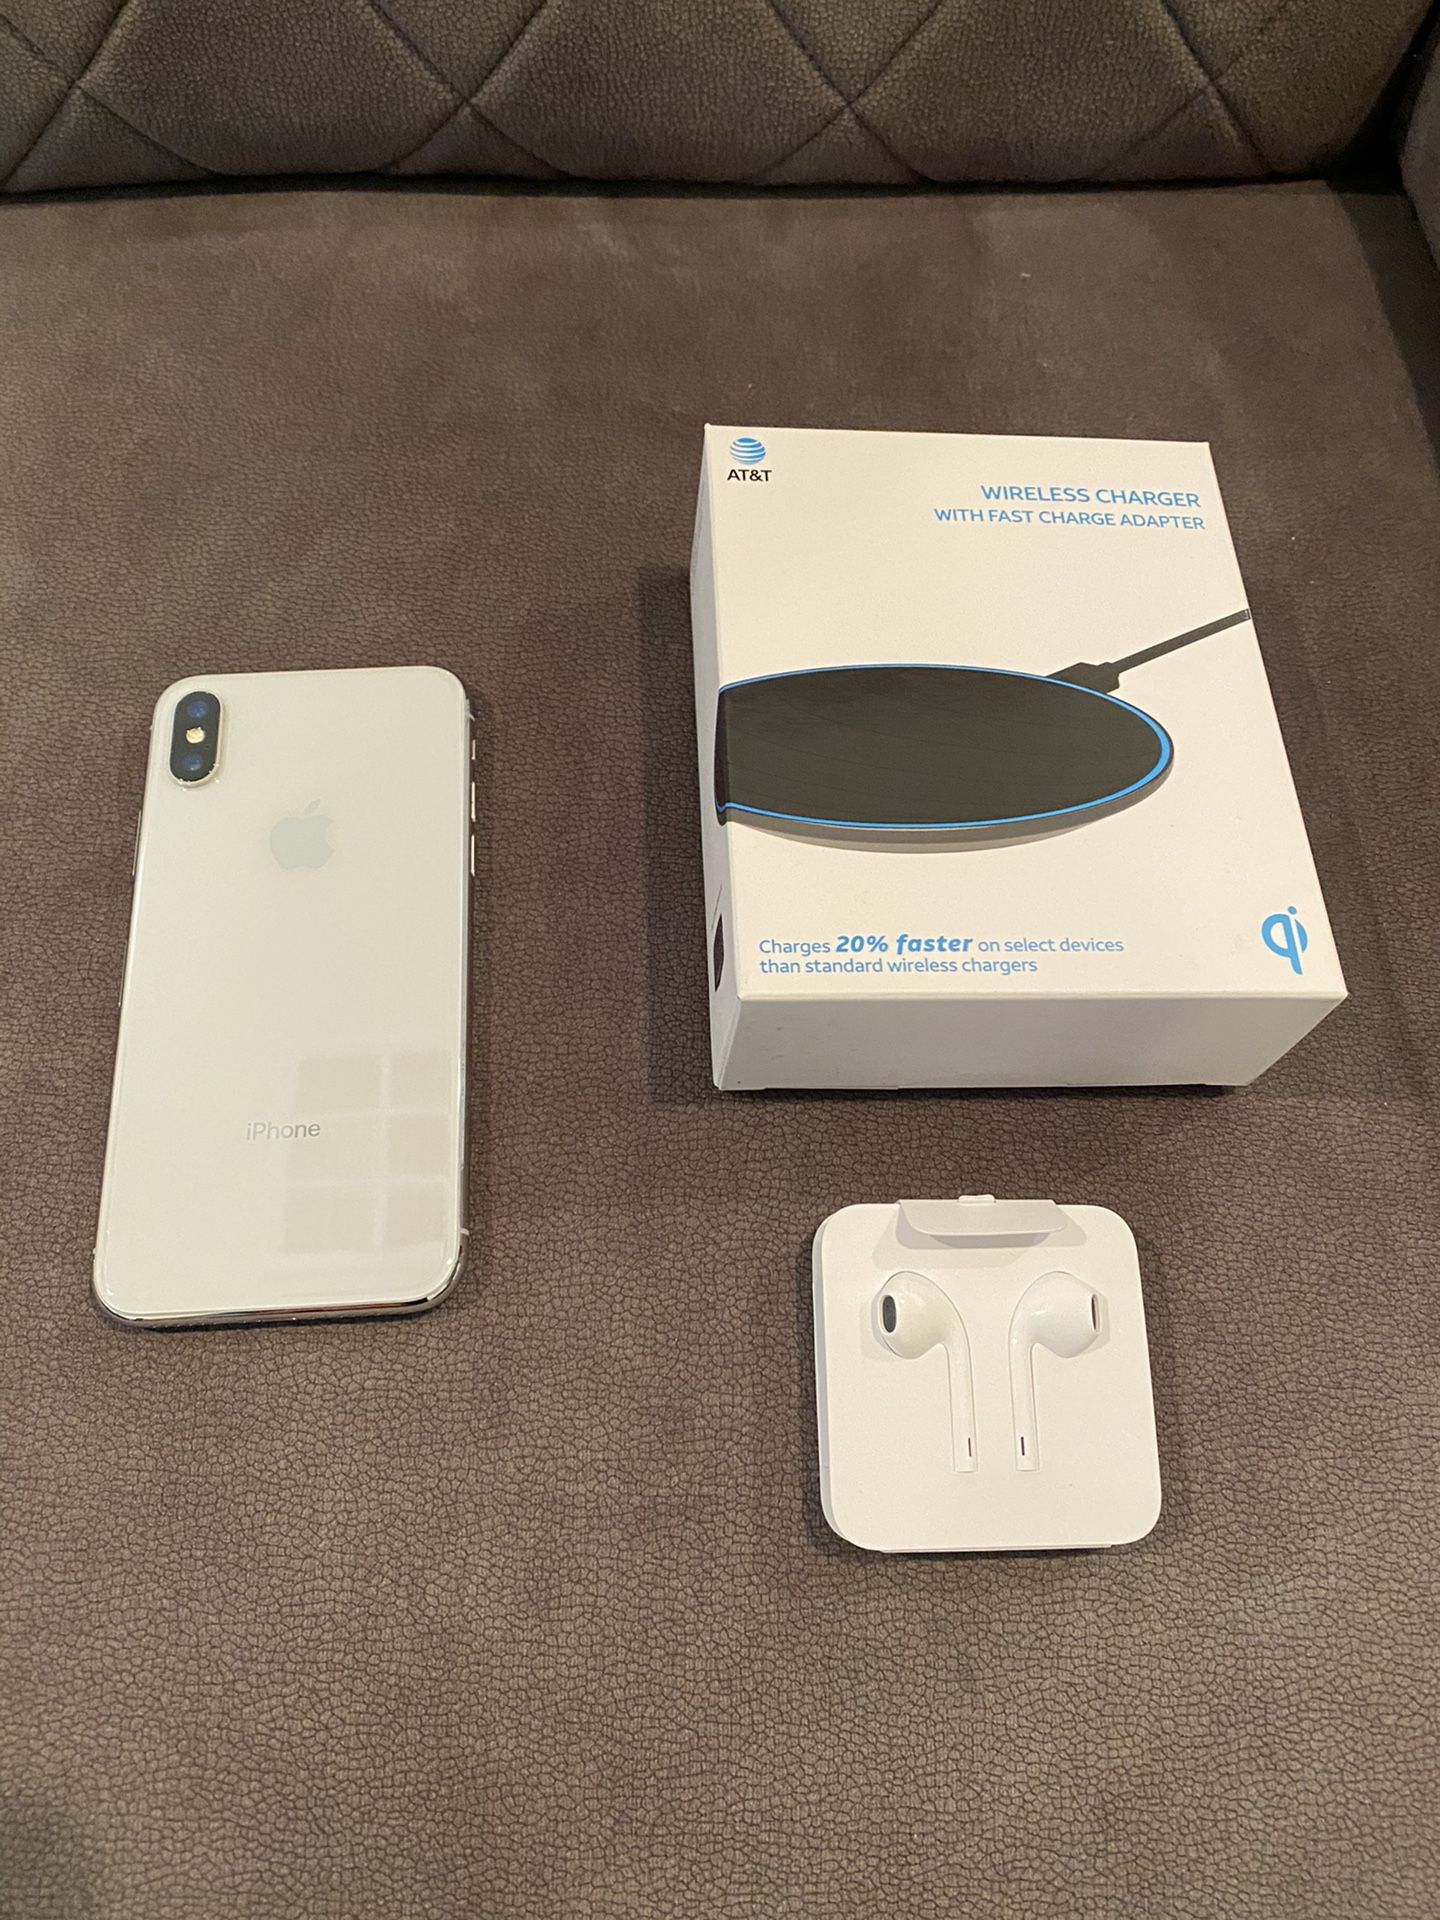 White iPhone X 64GB, AT&T unlocked, brand new fast wireless charging pad, brand new Apple wired headphones (excellent condition)